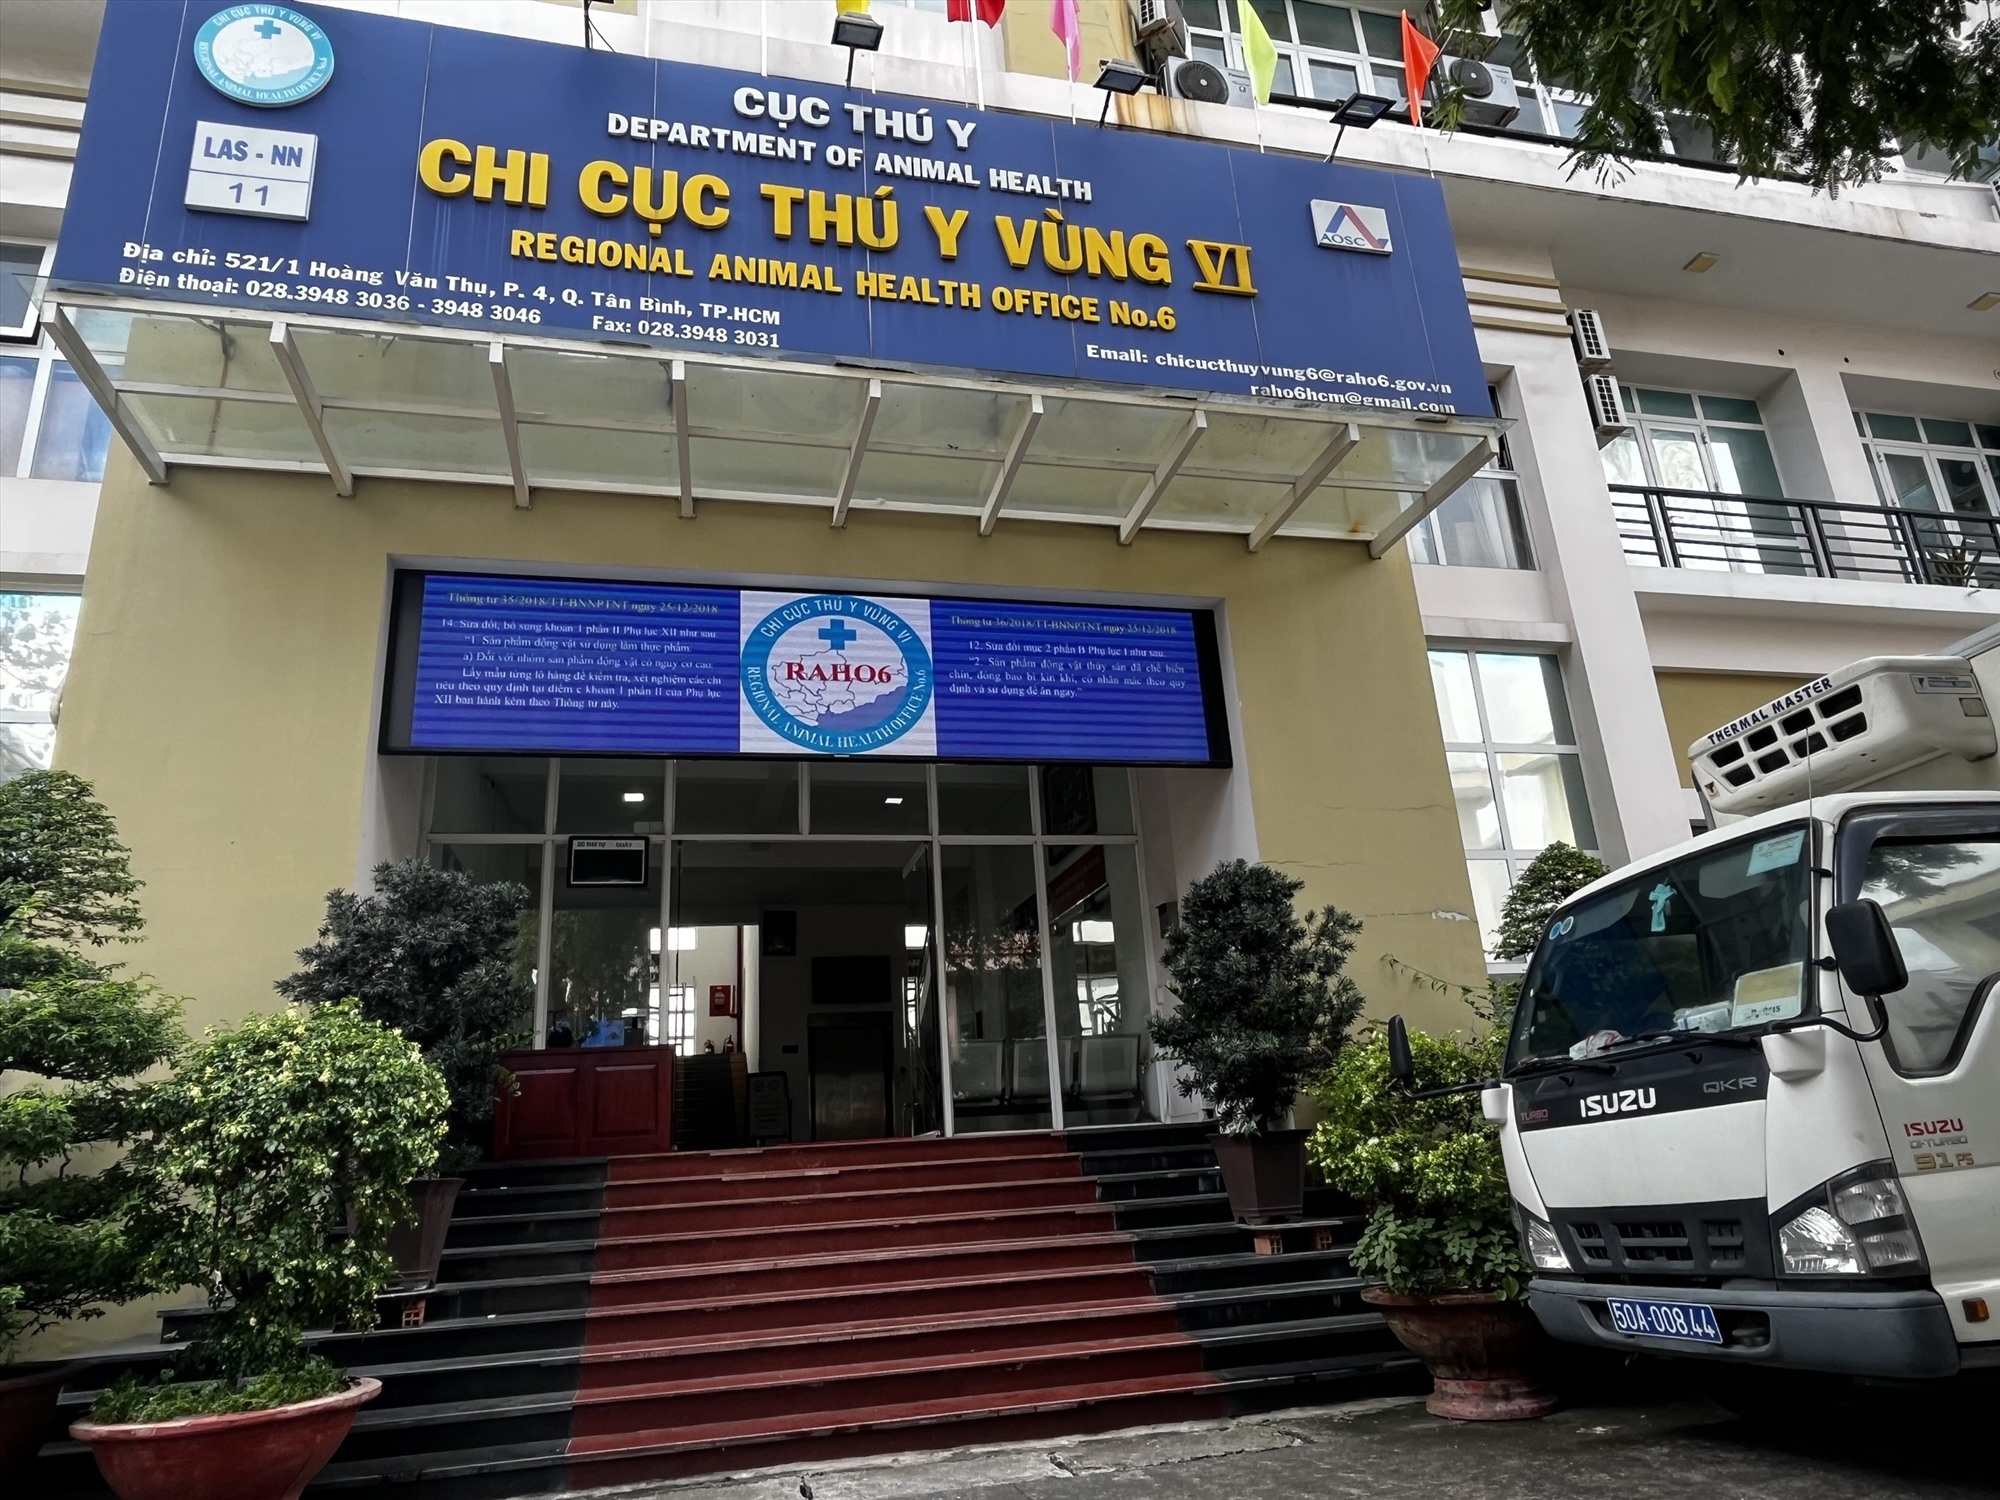 Organizational structure of the Animal Health Authority in Vietnam (latest update)